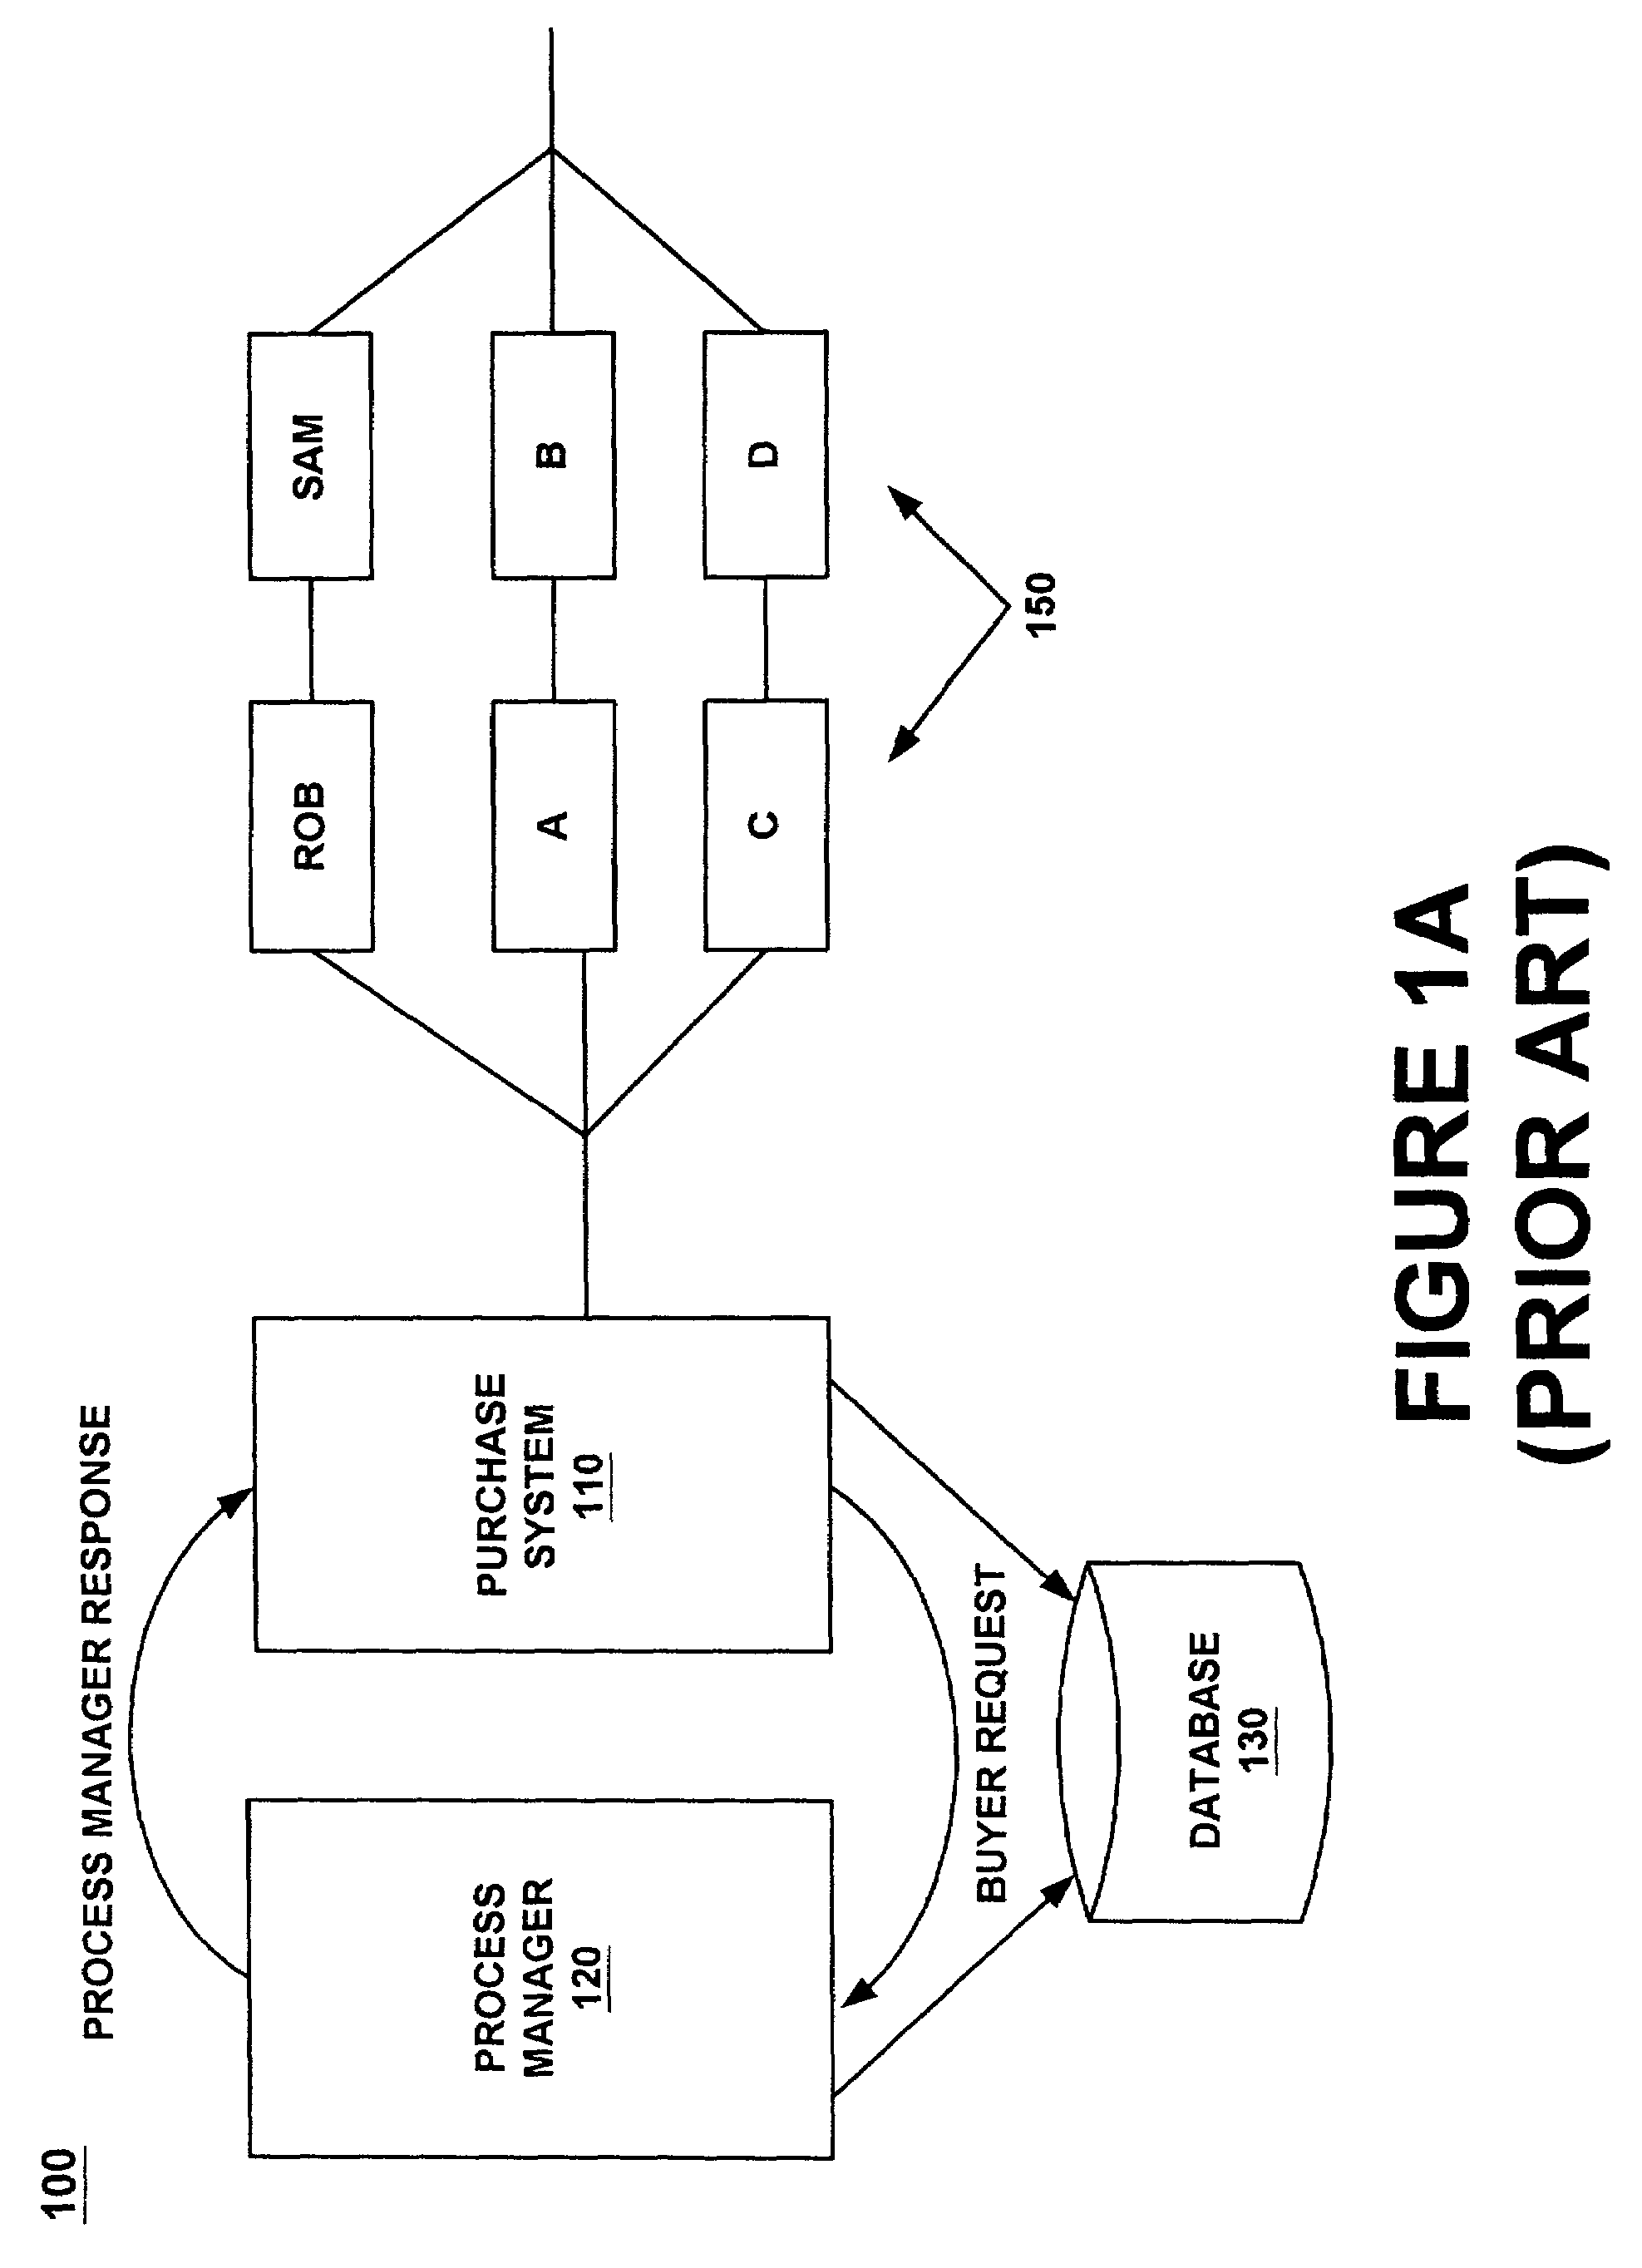 Line item approval processing in an electronic purchasing system and method